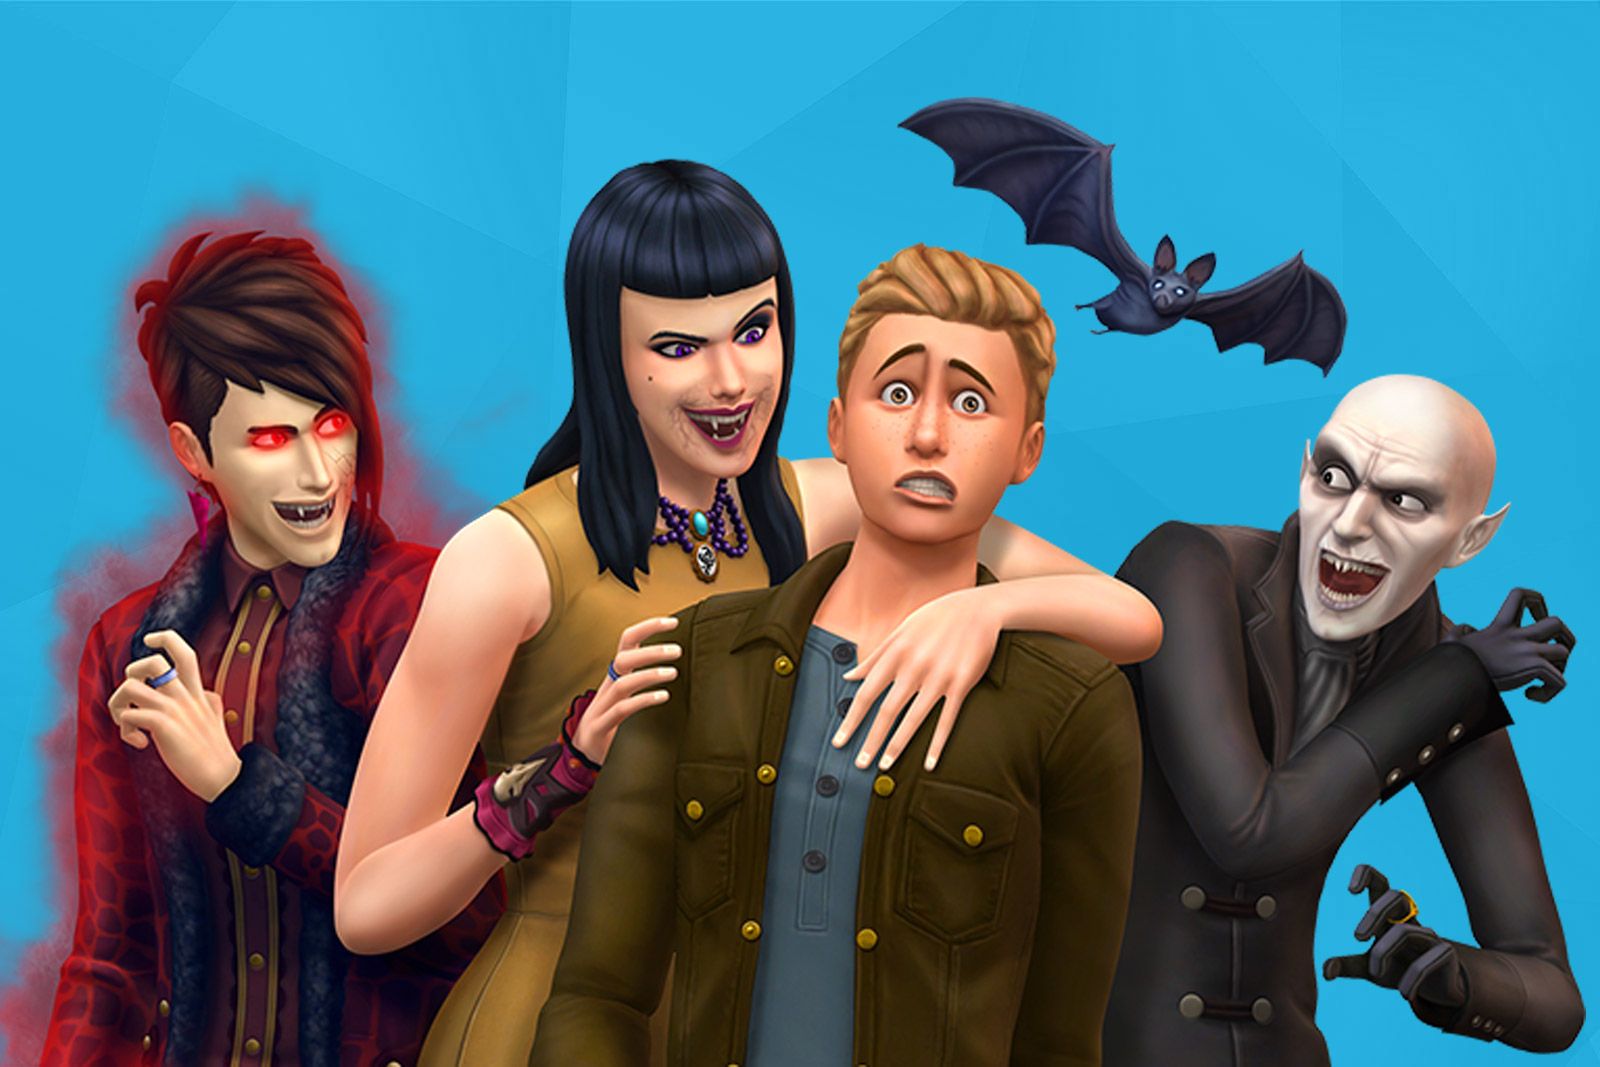 The Sims 4 Vampires Pack